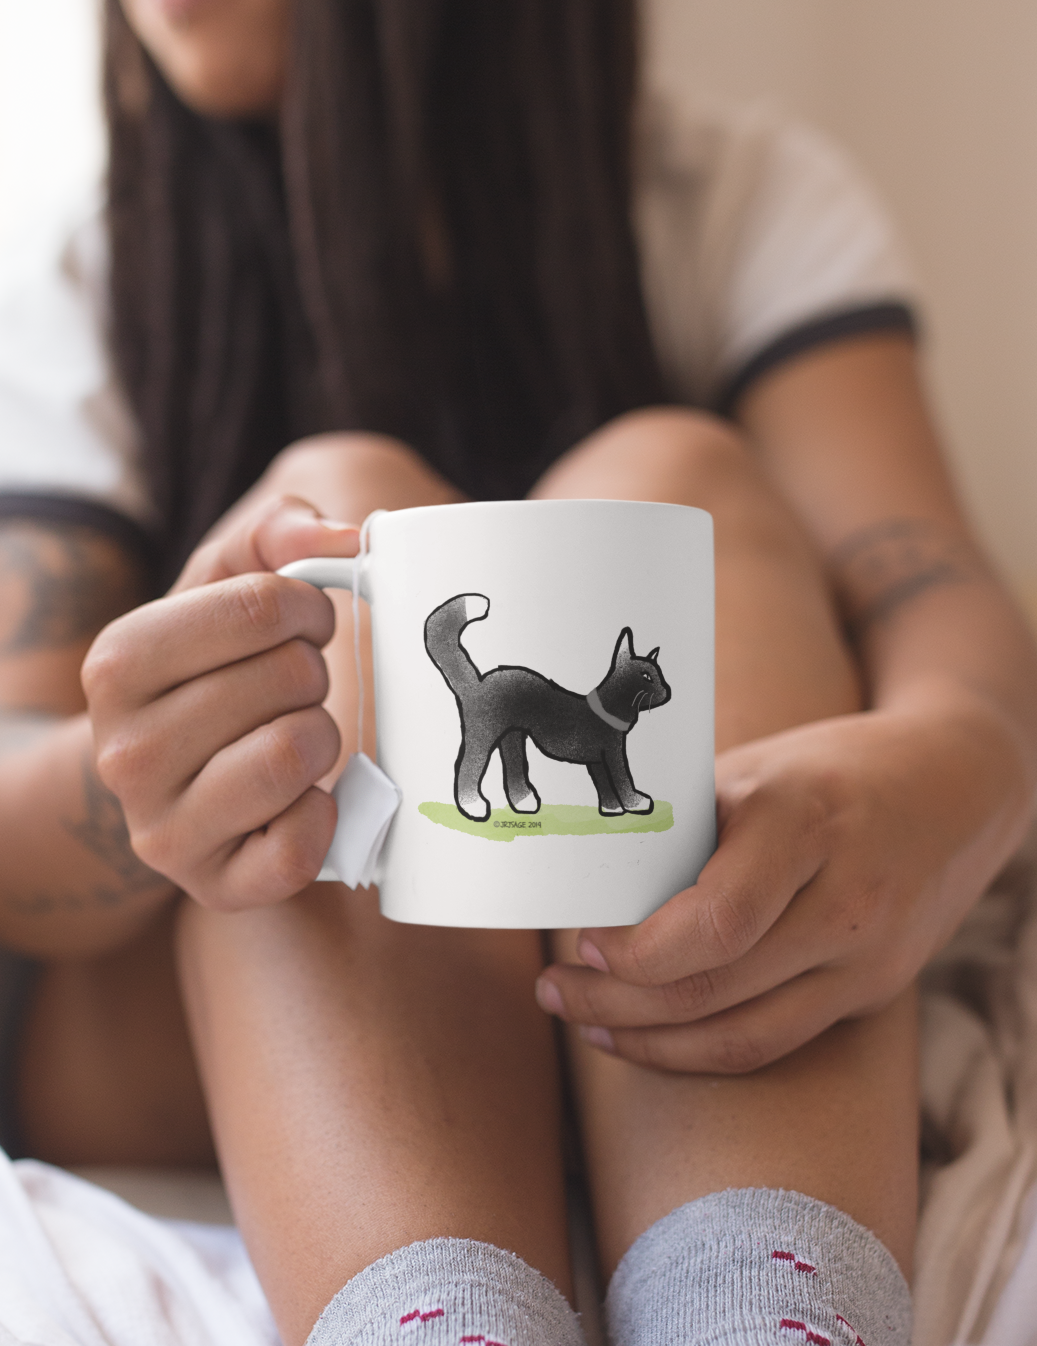 Black Cat Mug - Young woman holding a White Ceramic Hector and Bone coffee Mug with a cute Black Cat with white bits illustration